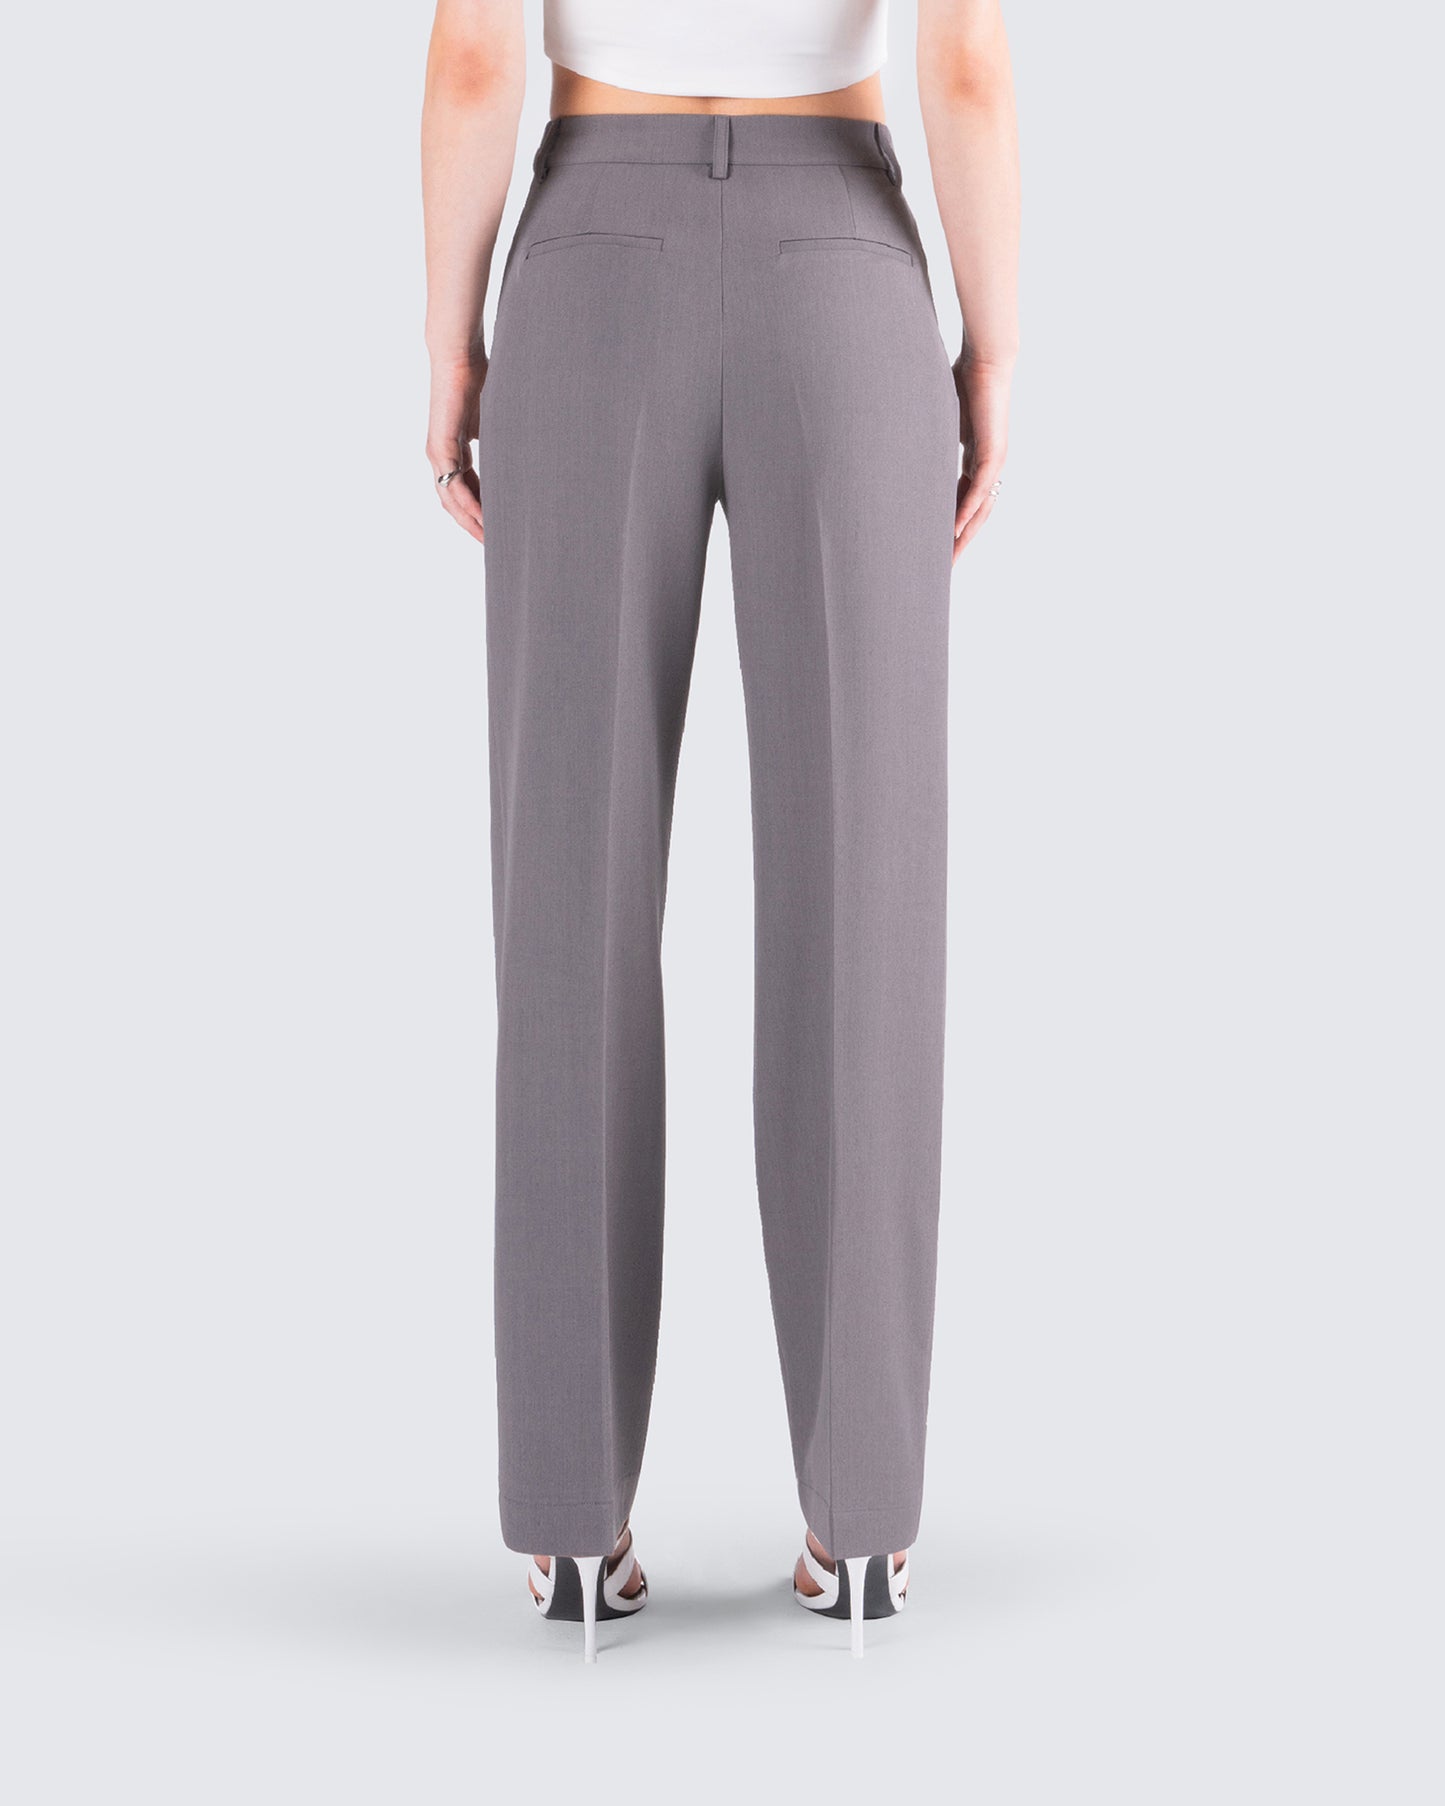 Reese Grey Tailored Pants